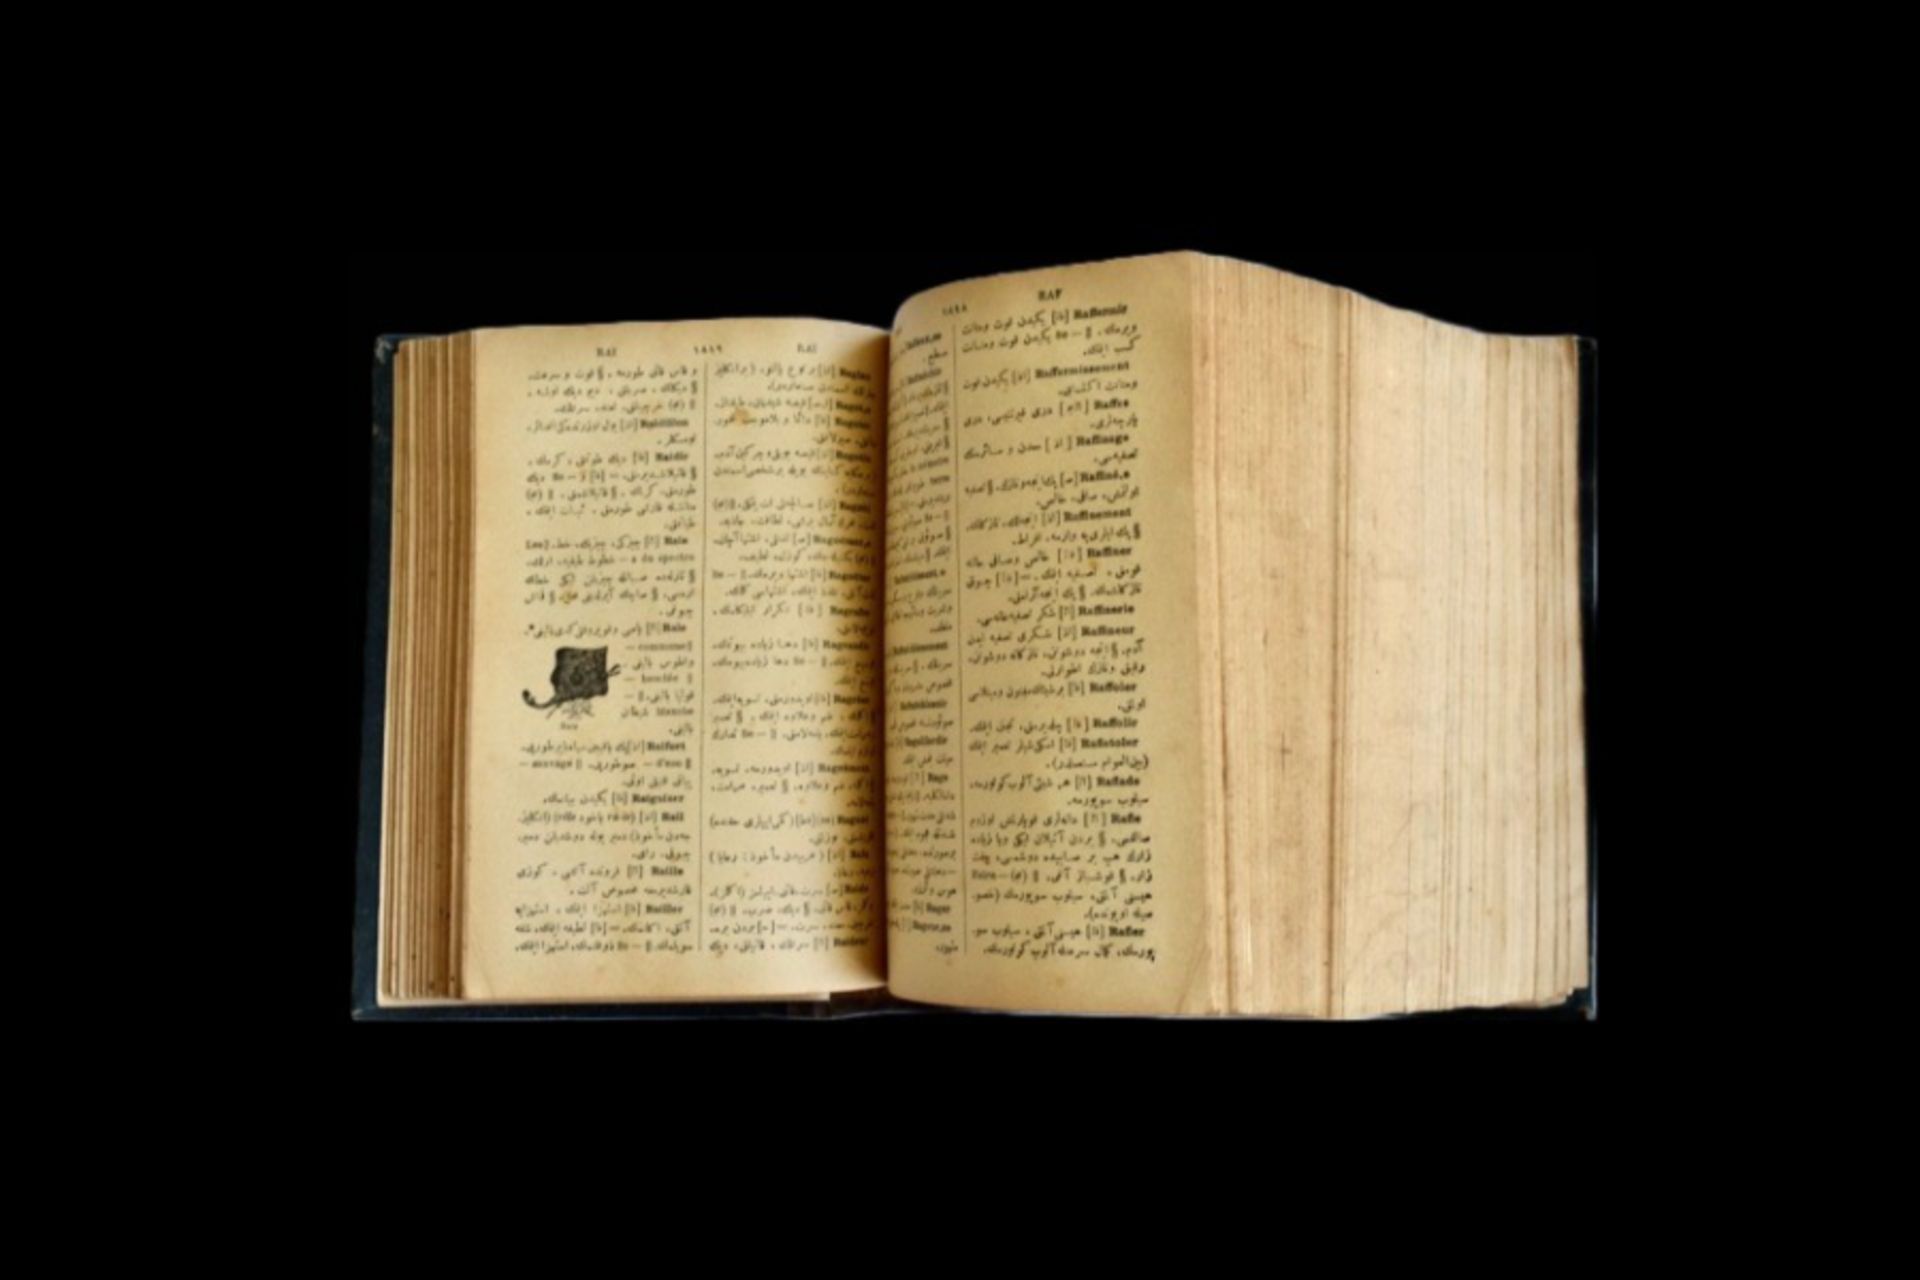 19th century French - Ottoman dictionary - Image 3 of 19